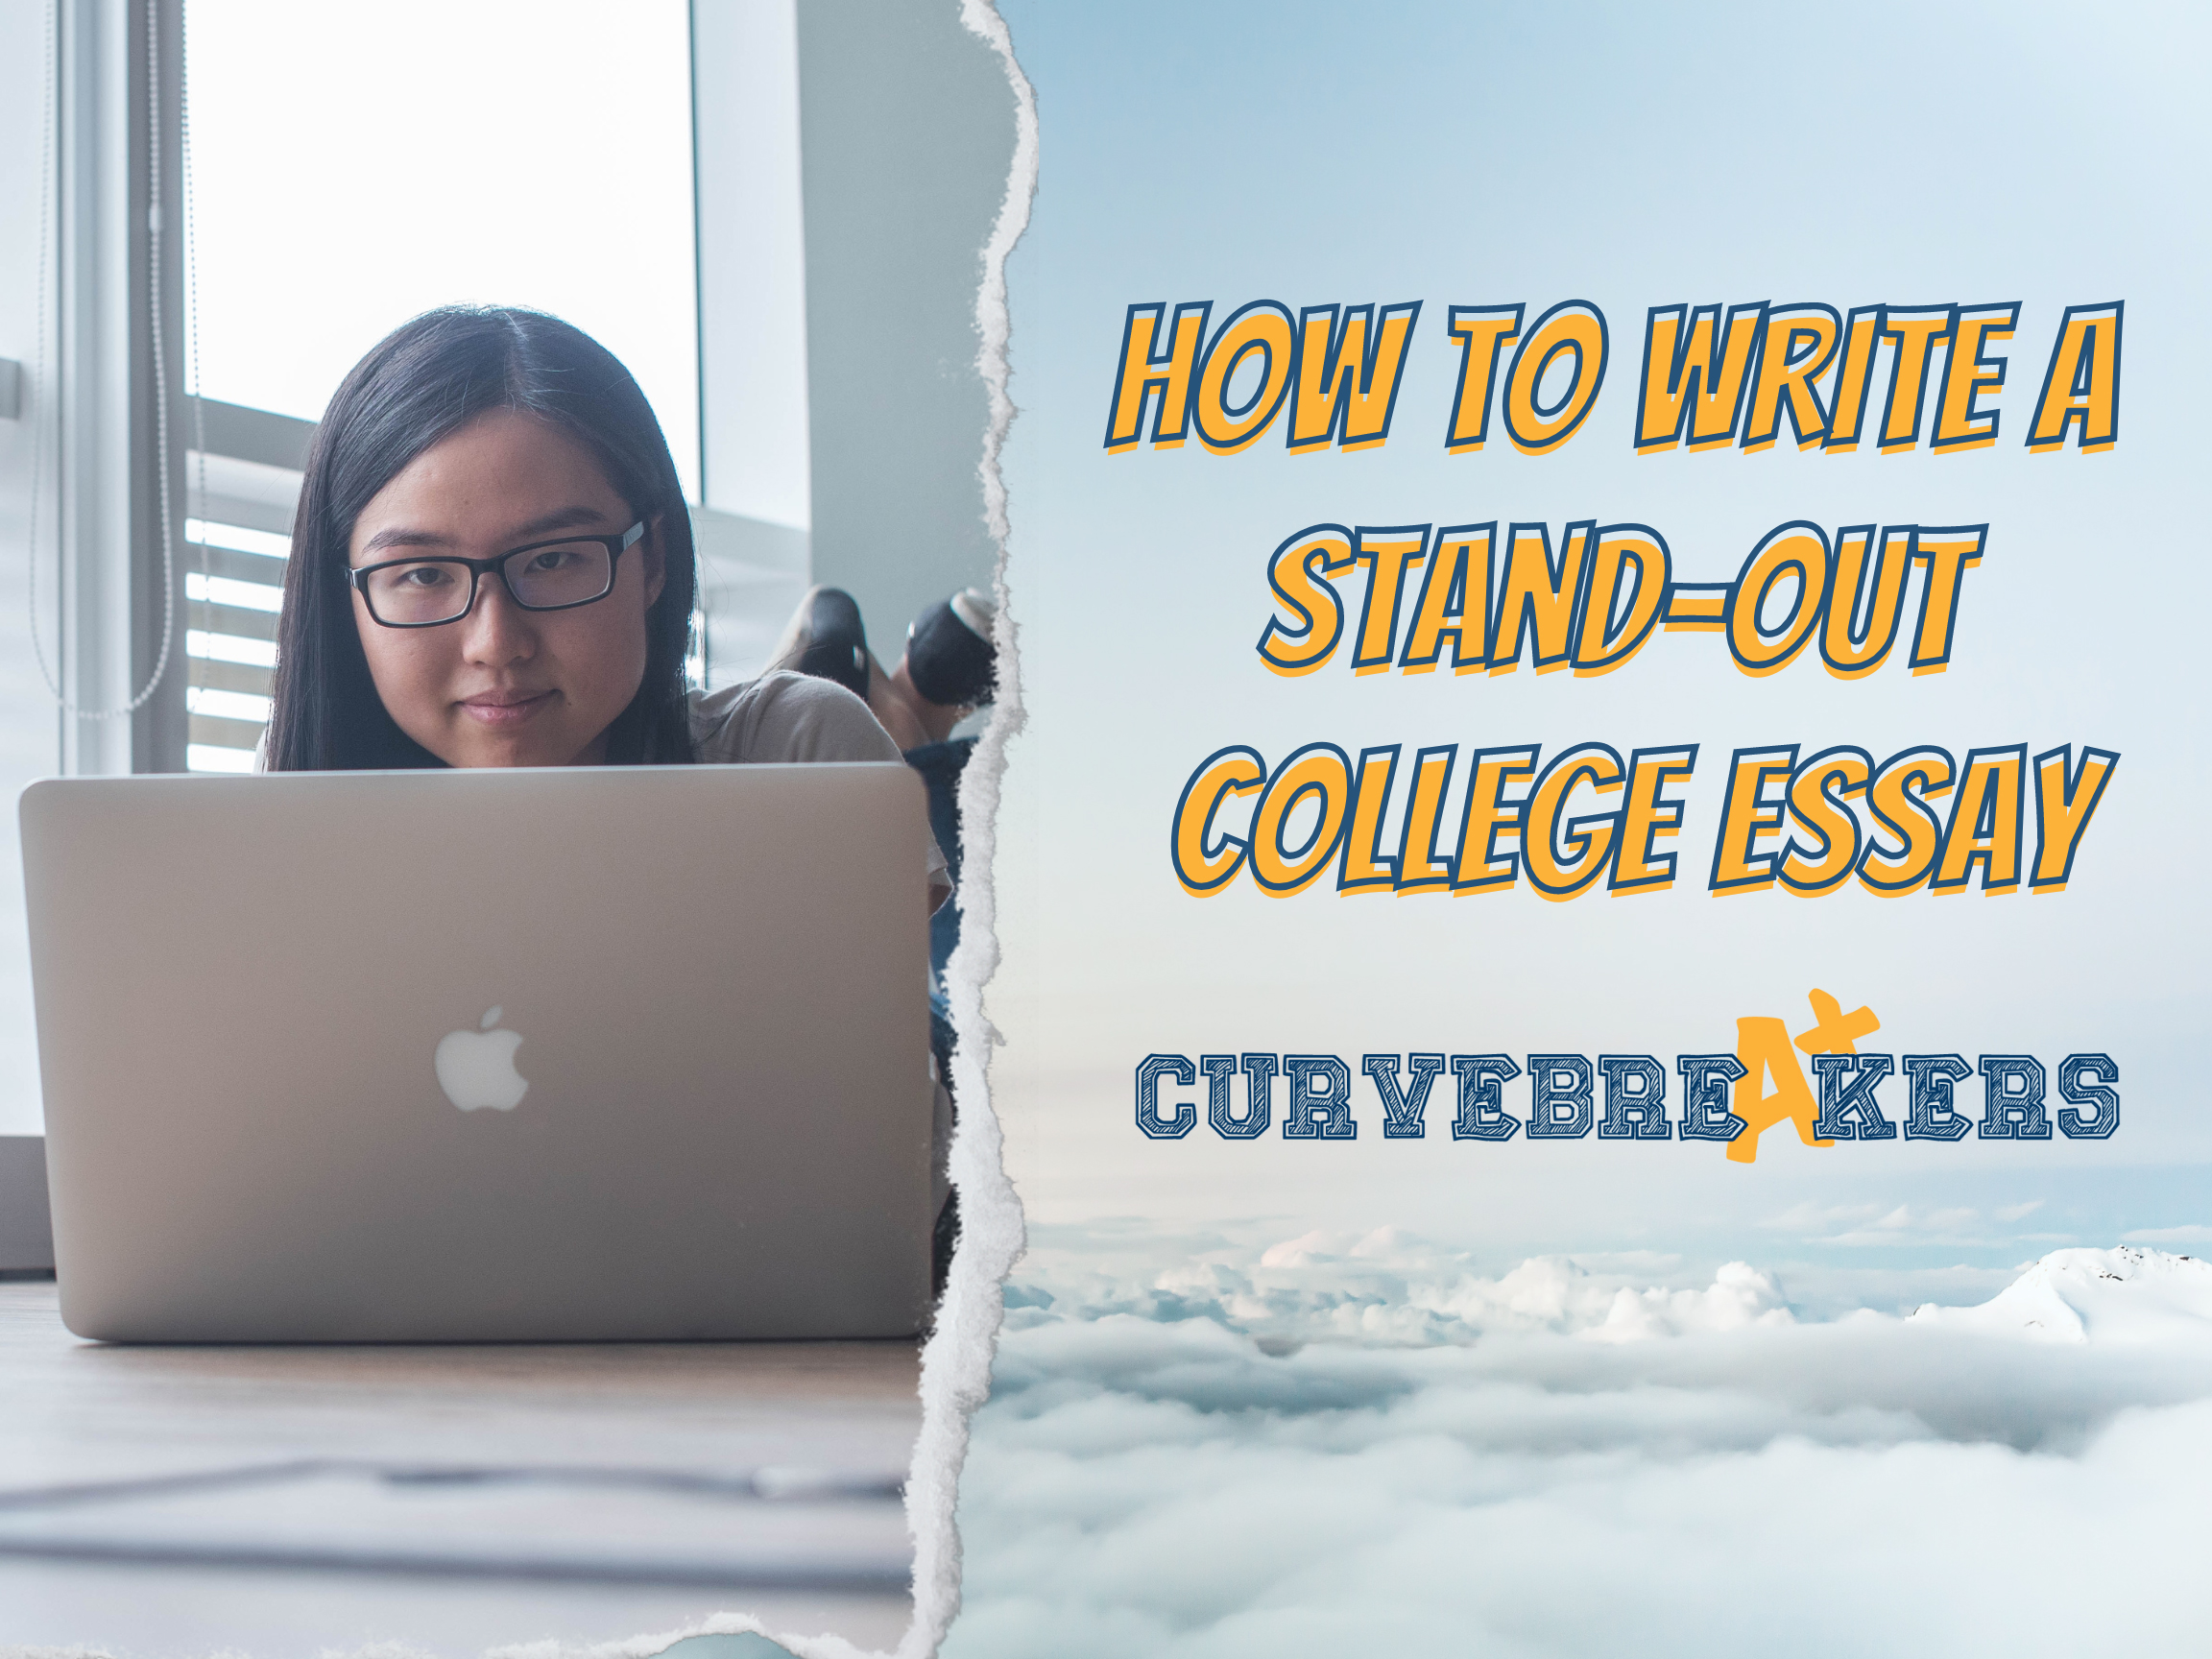 how can you make your college essay stand out